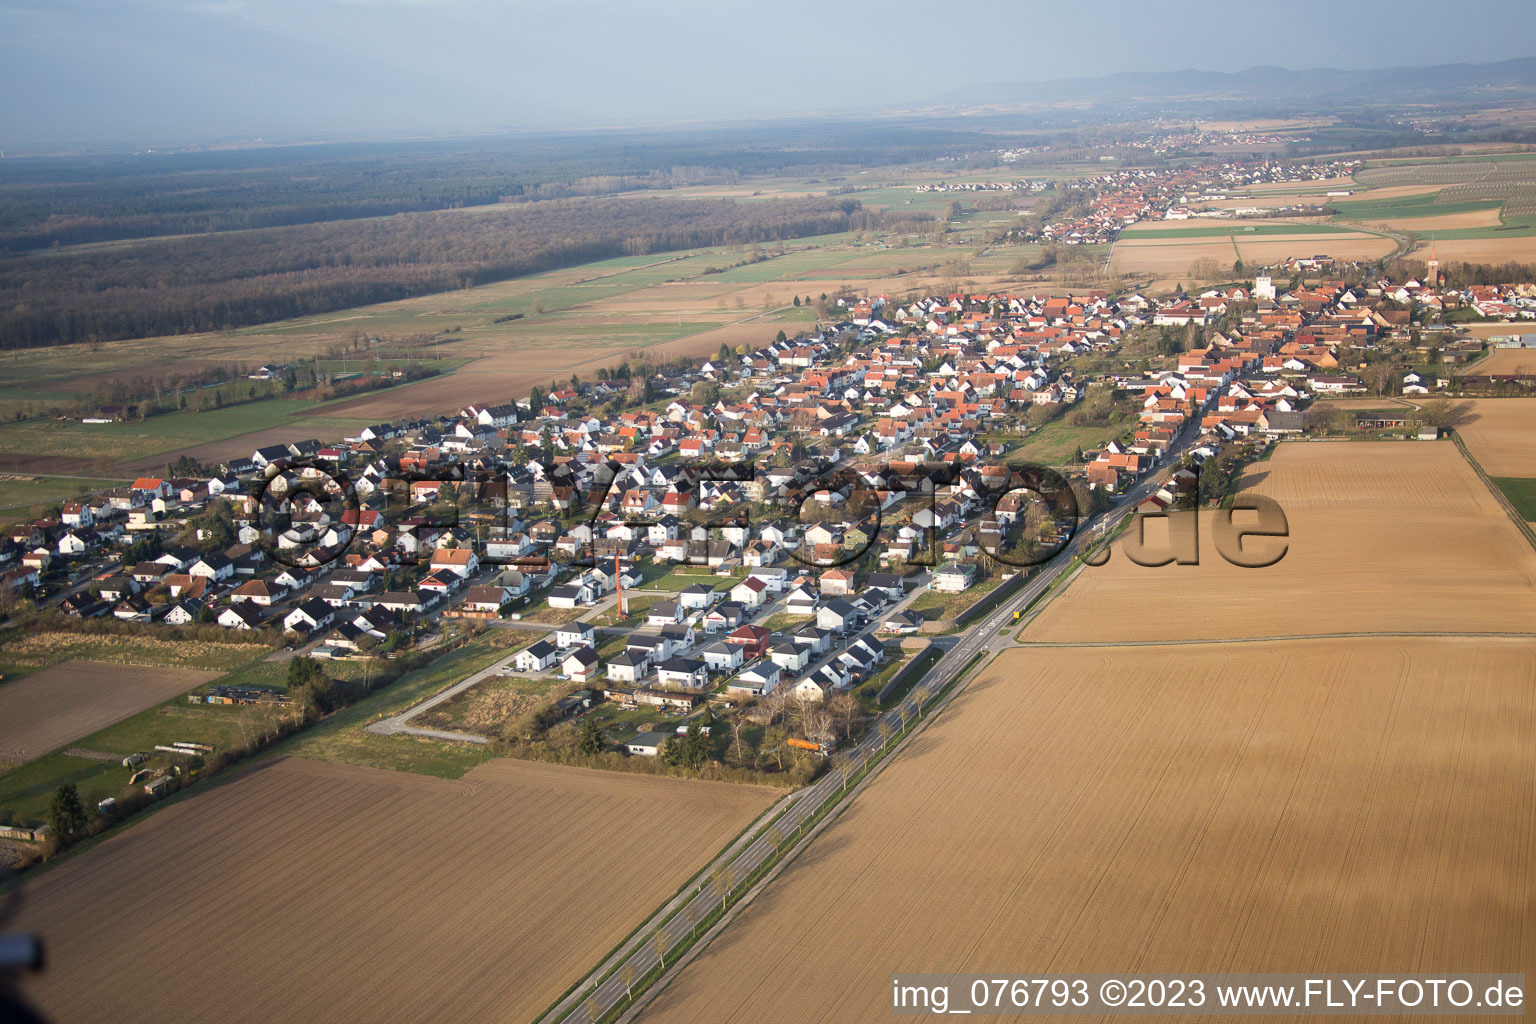 Drone image of Minfeld in the state Rhineland-Palatinate, Germany